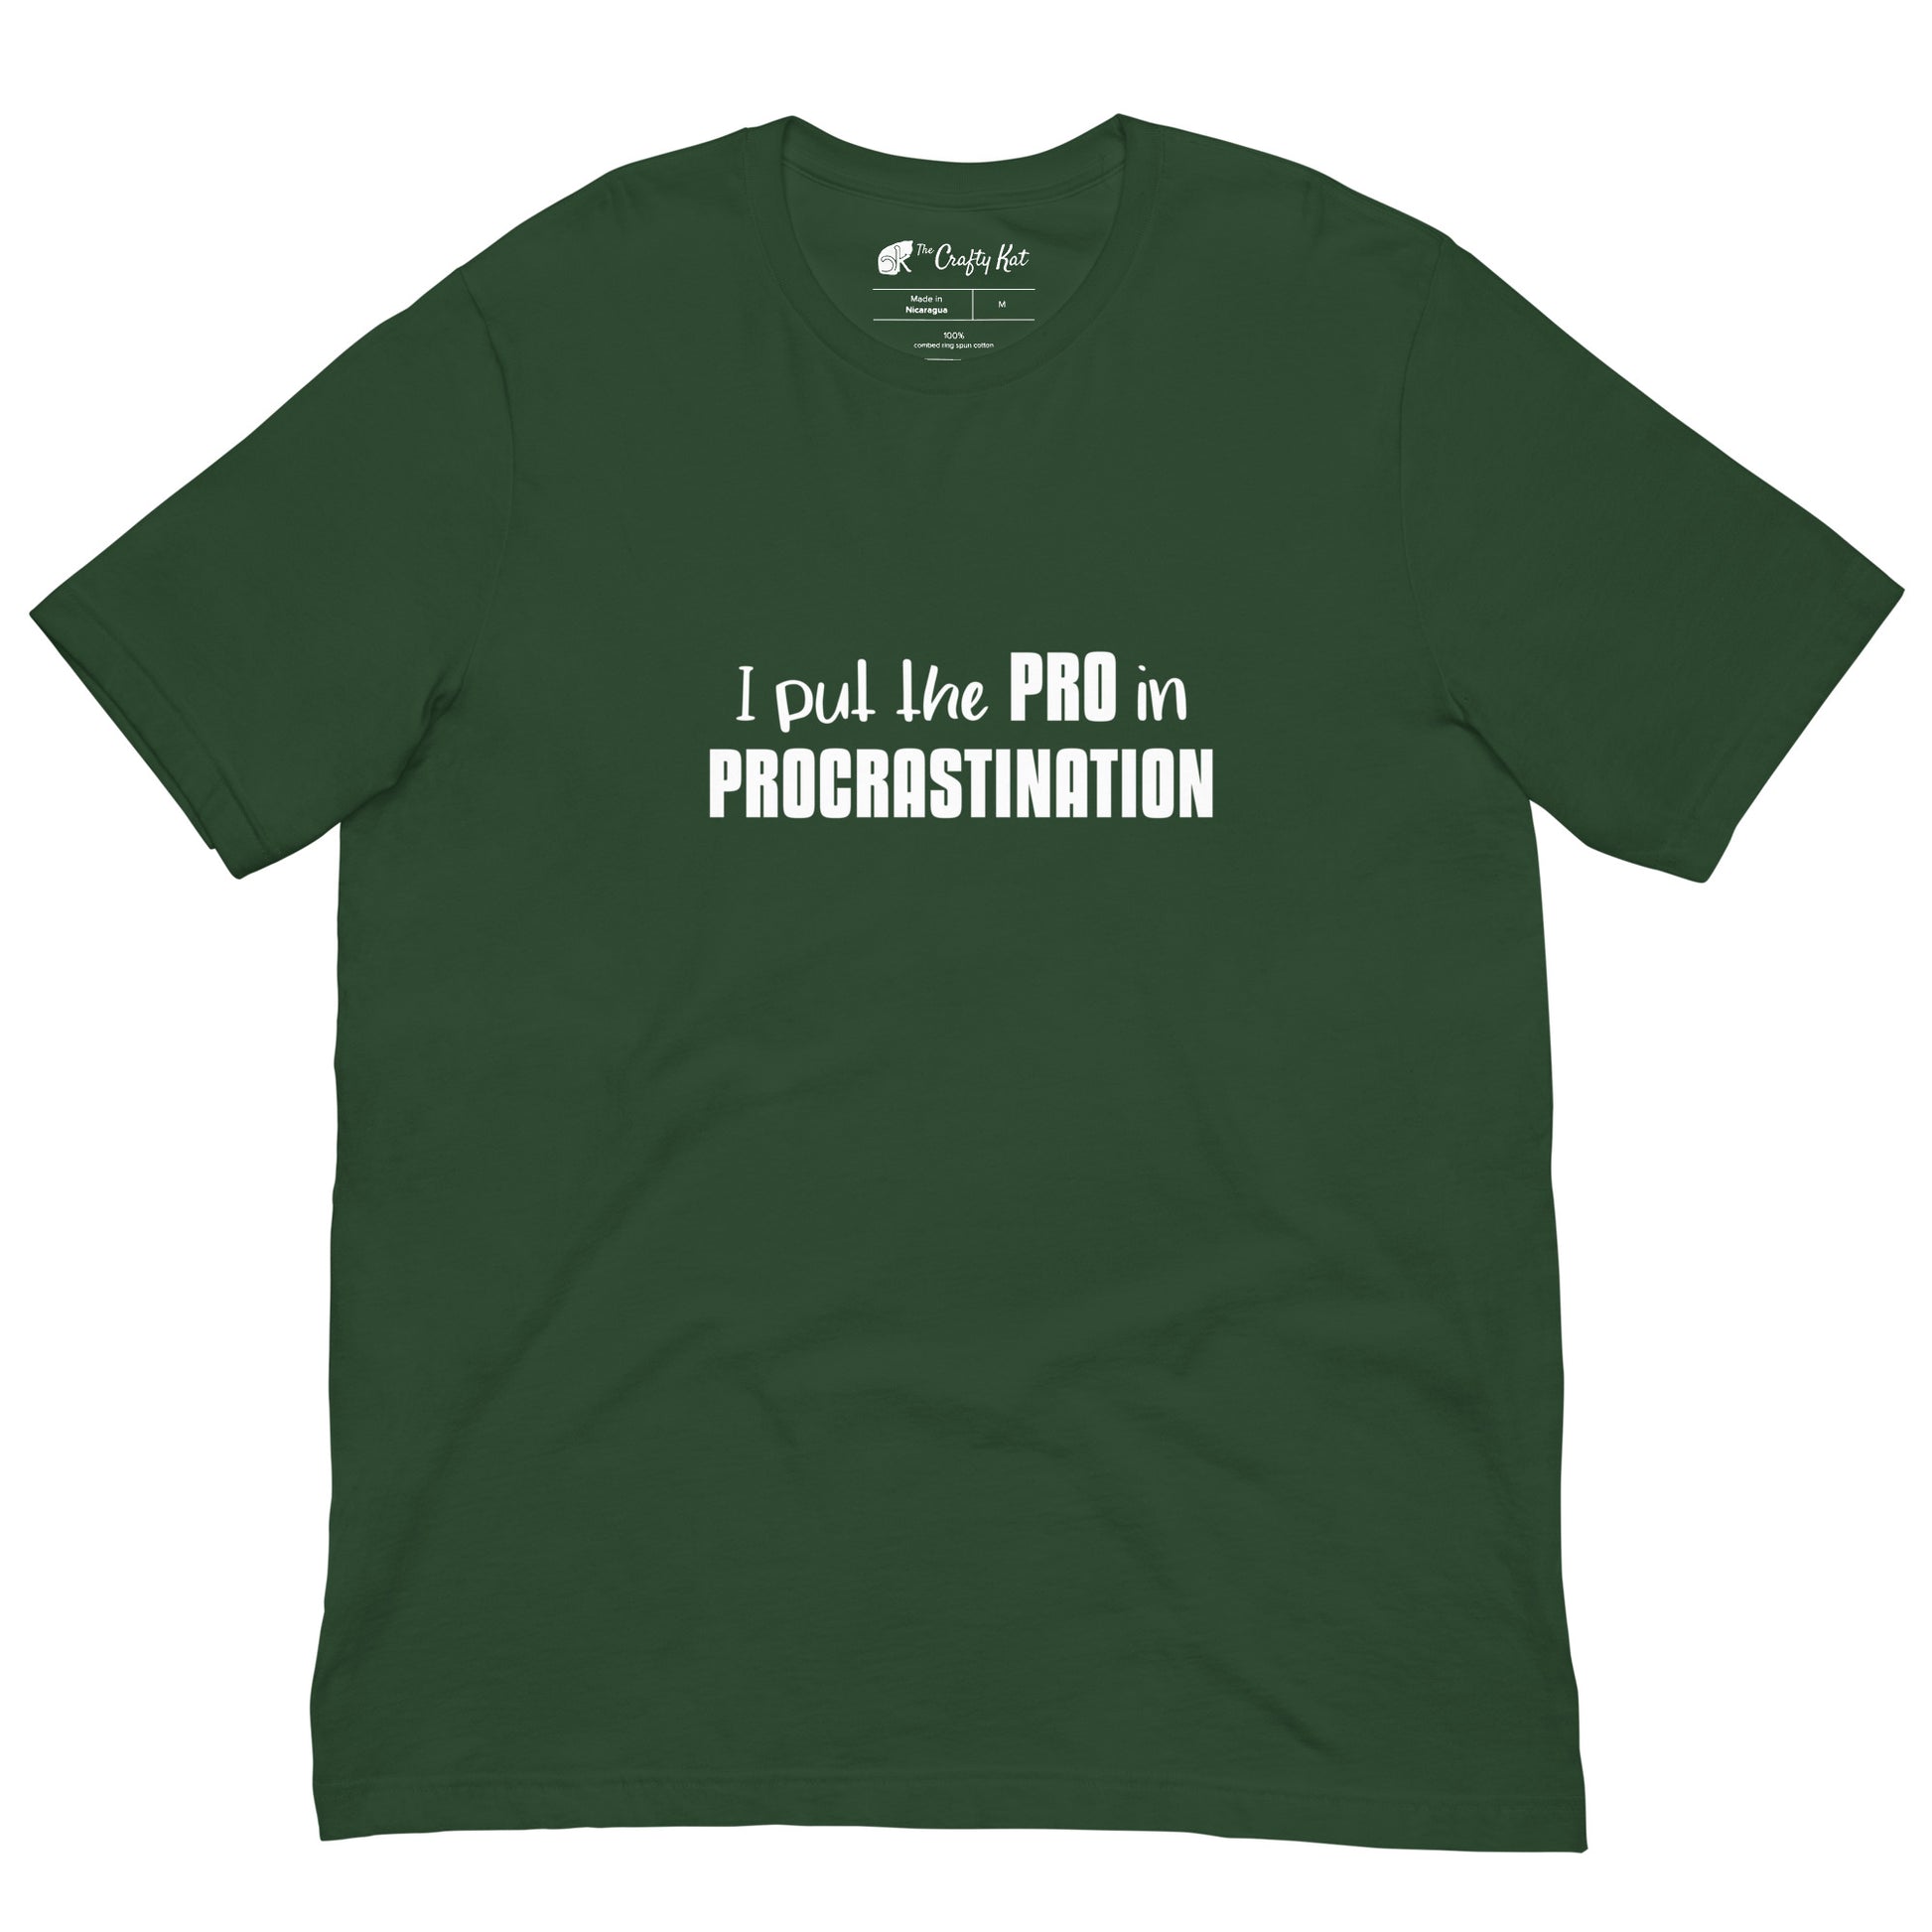 Forest green unisex t-shirt with text graphic: "I put the PRO in PROCRASTINATION"